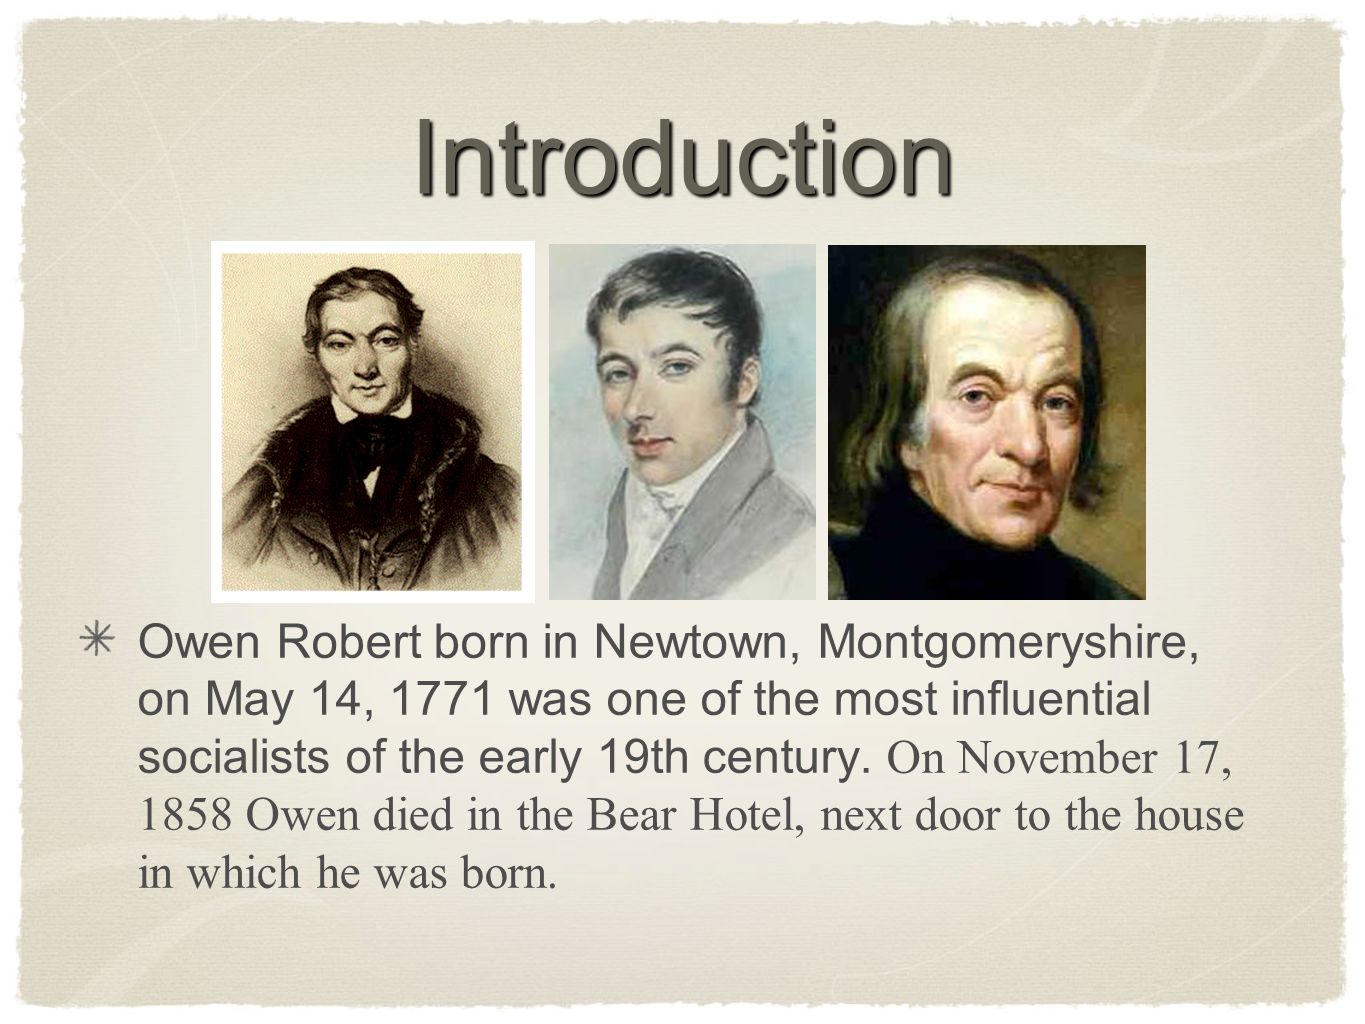 Robert Owen and Socialism. Introduction Owen Robert born in Newtown, Montgomeryshire, on May 14, 1771 was one of the most influential socialists of the. - ppt download